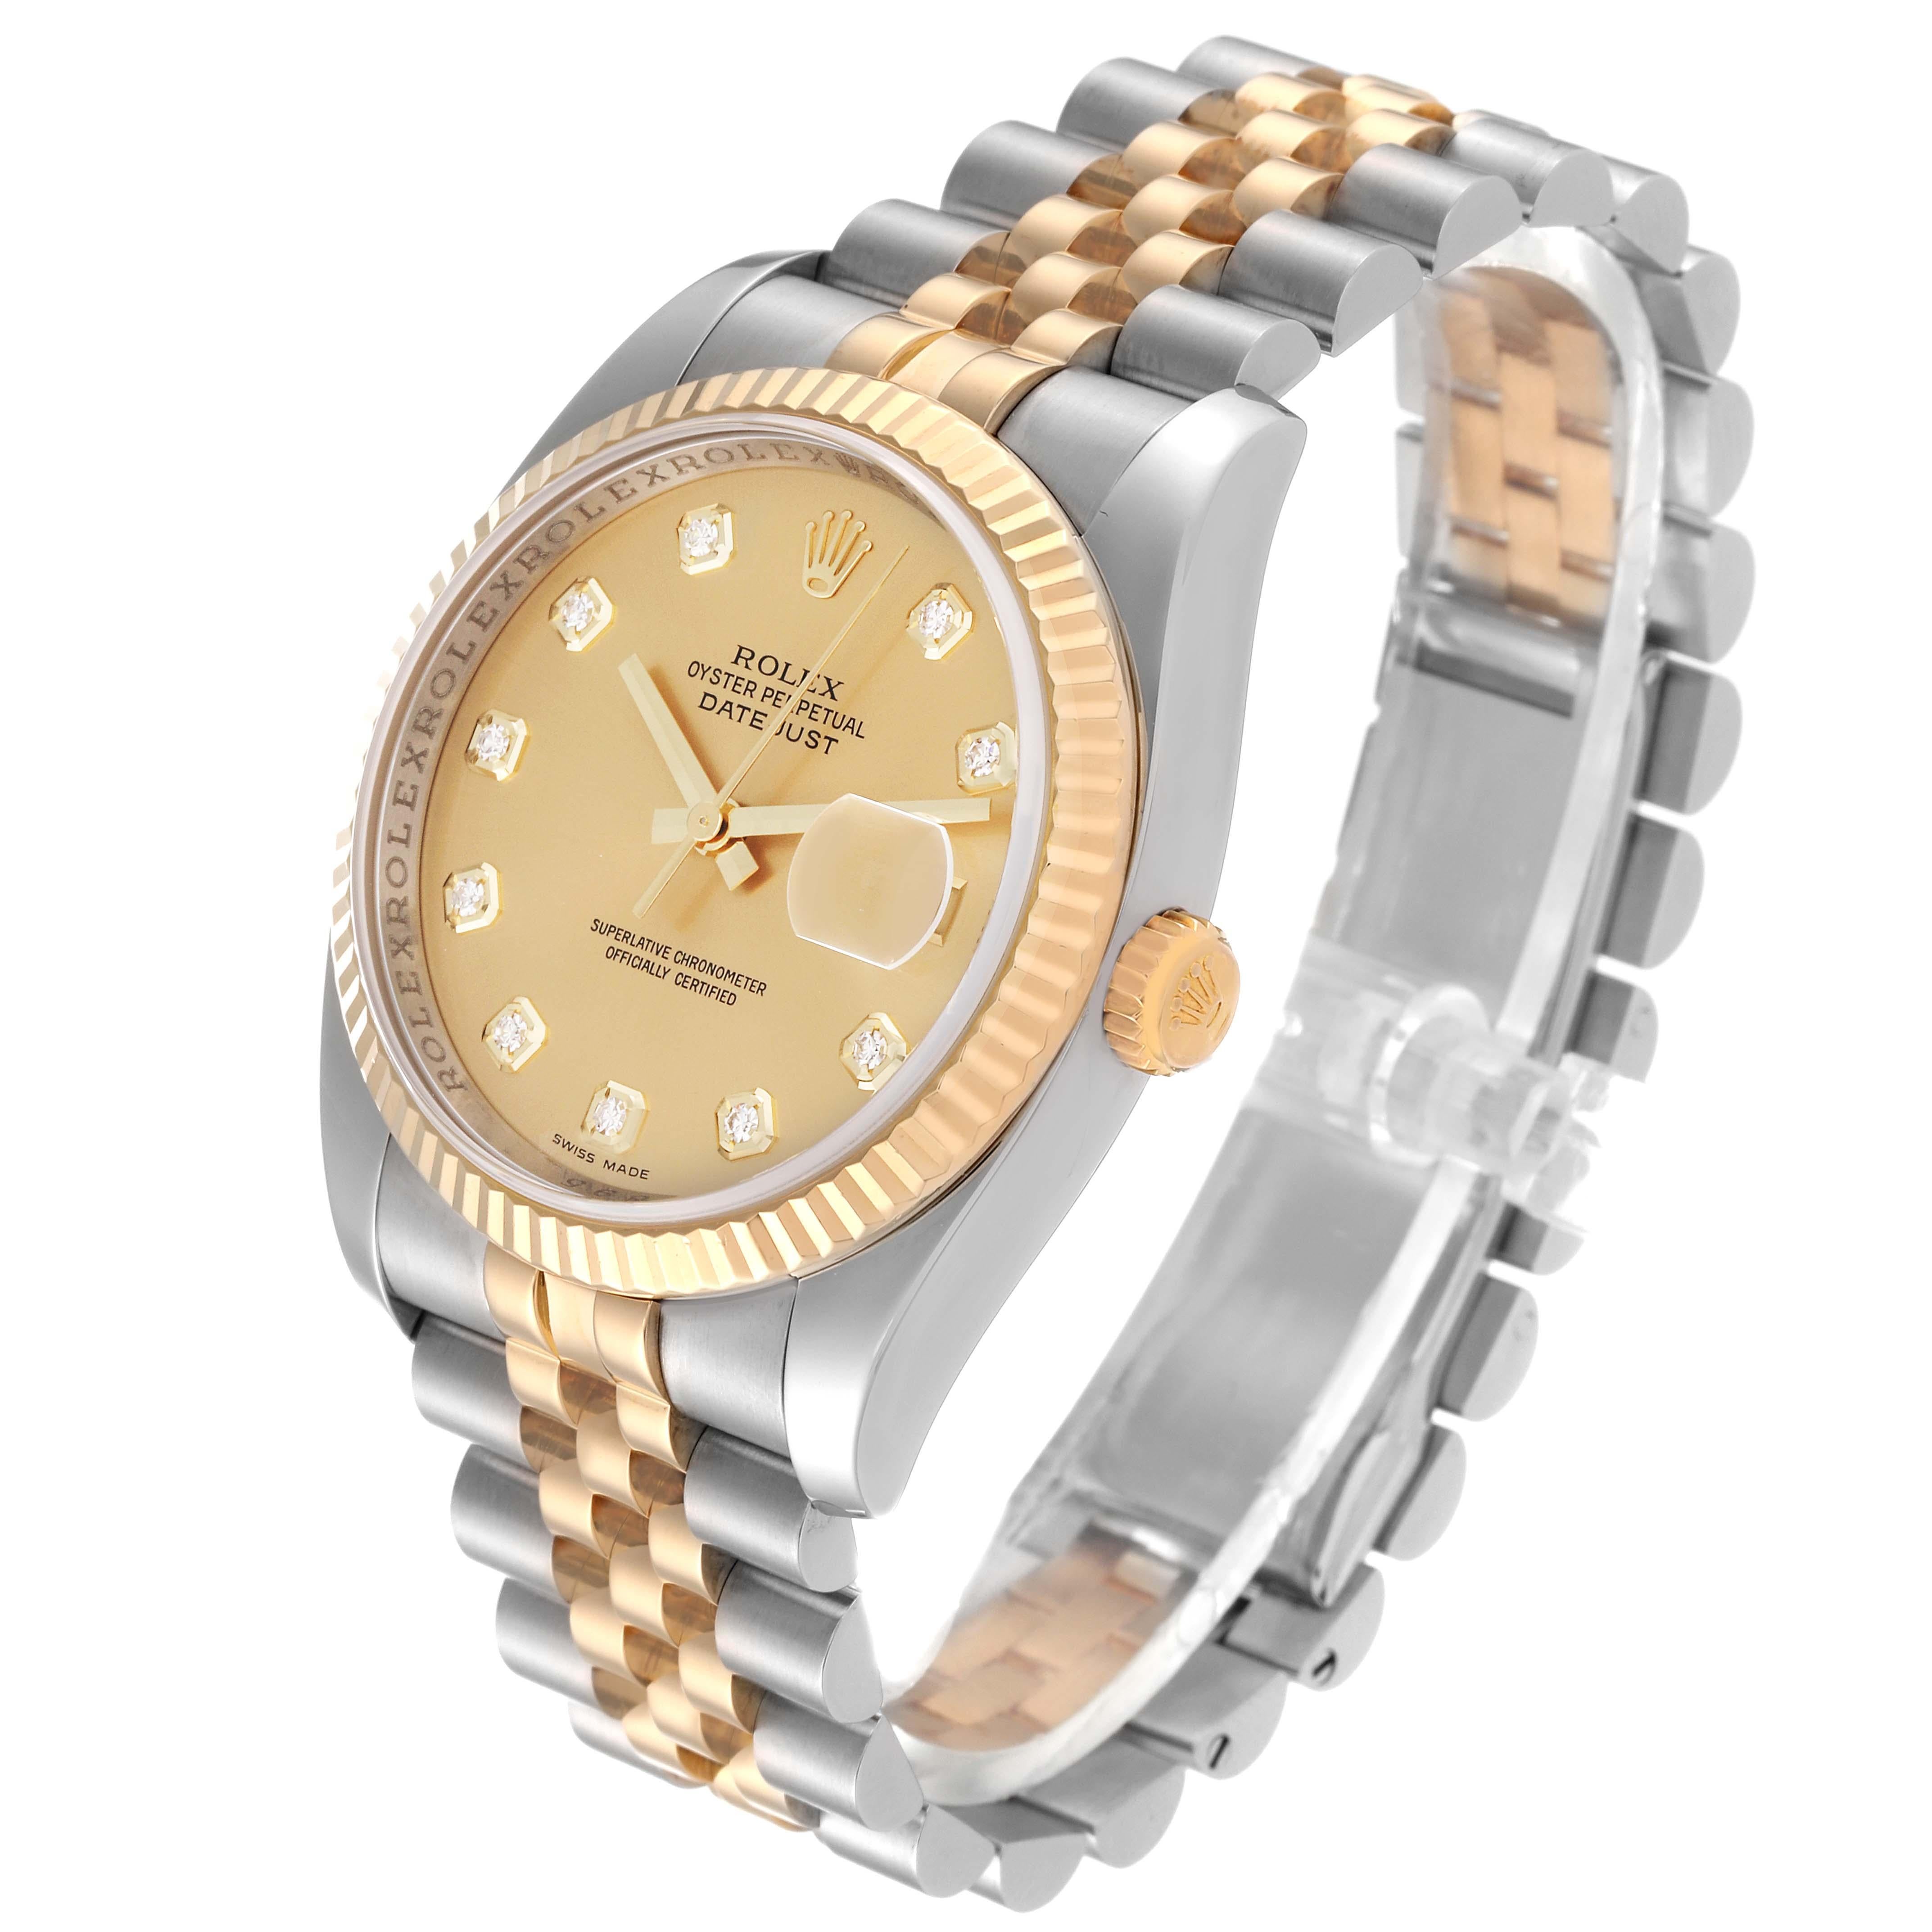 Rolex Datejust Steel Yellow Gold Champagne Diamond Dial Mens Watch 116233 For Sale 3